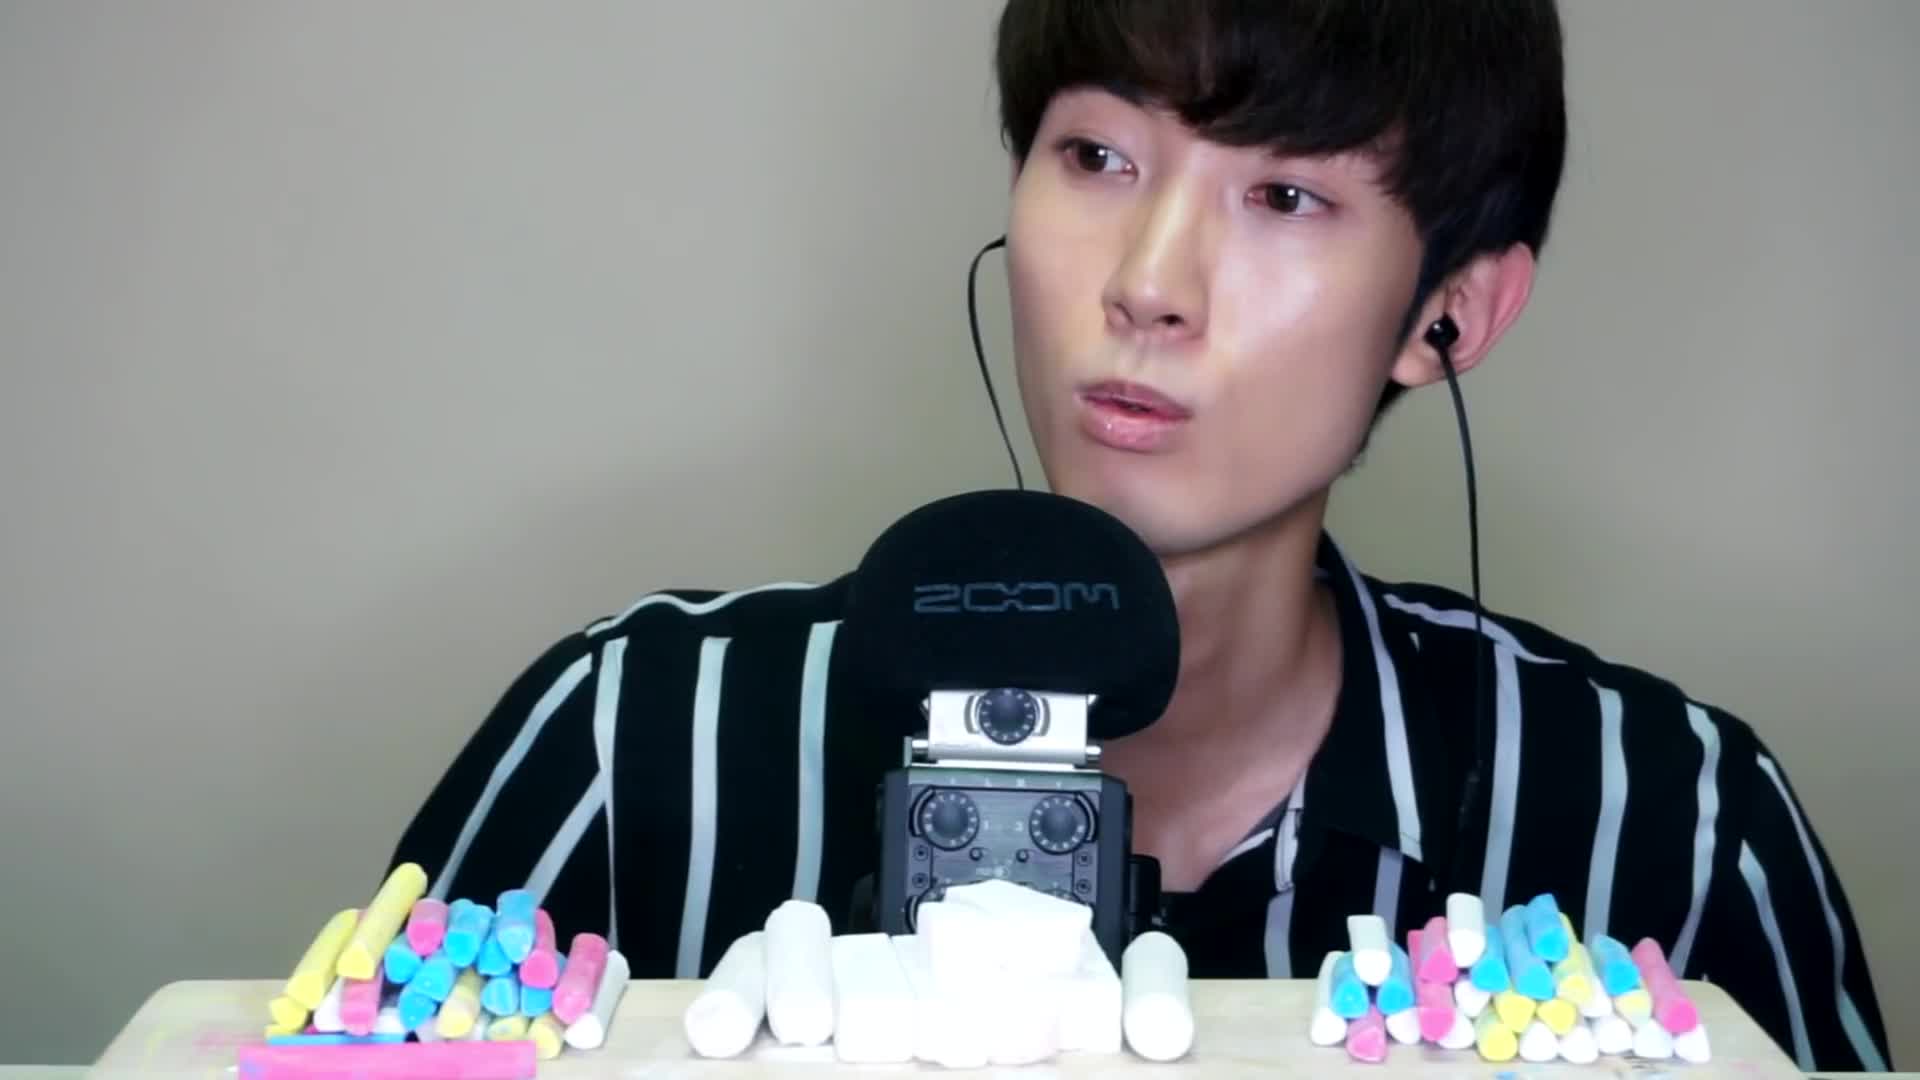 [Earphone Eating and Broadcasting] Little Brother Seven Chalk Law~It's better to wear earphones!